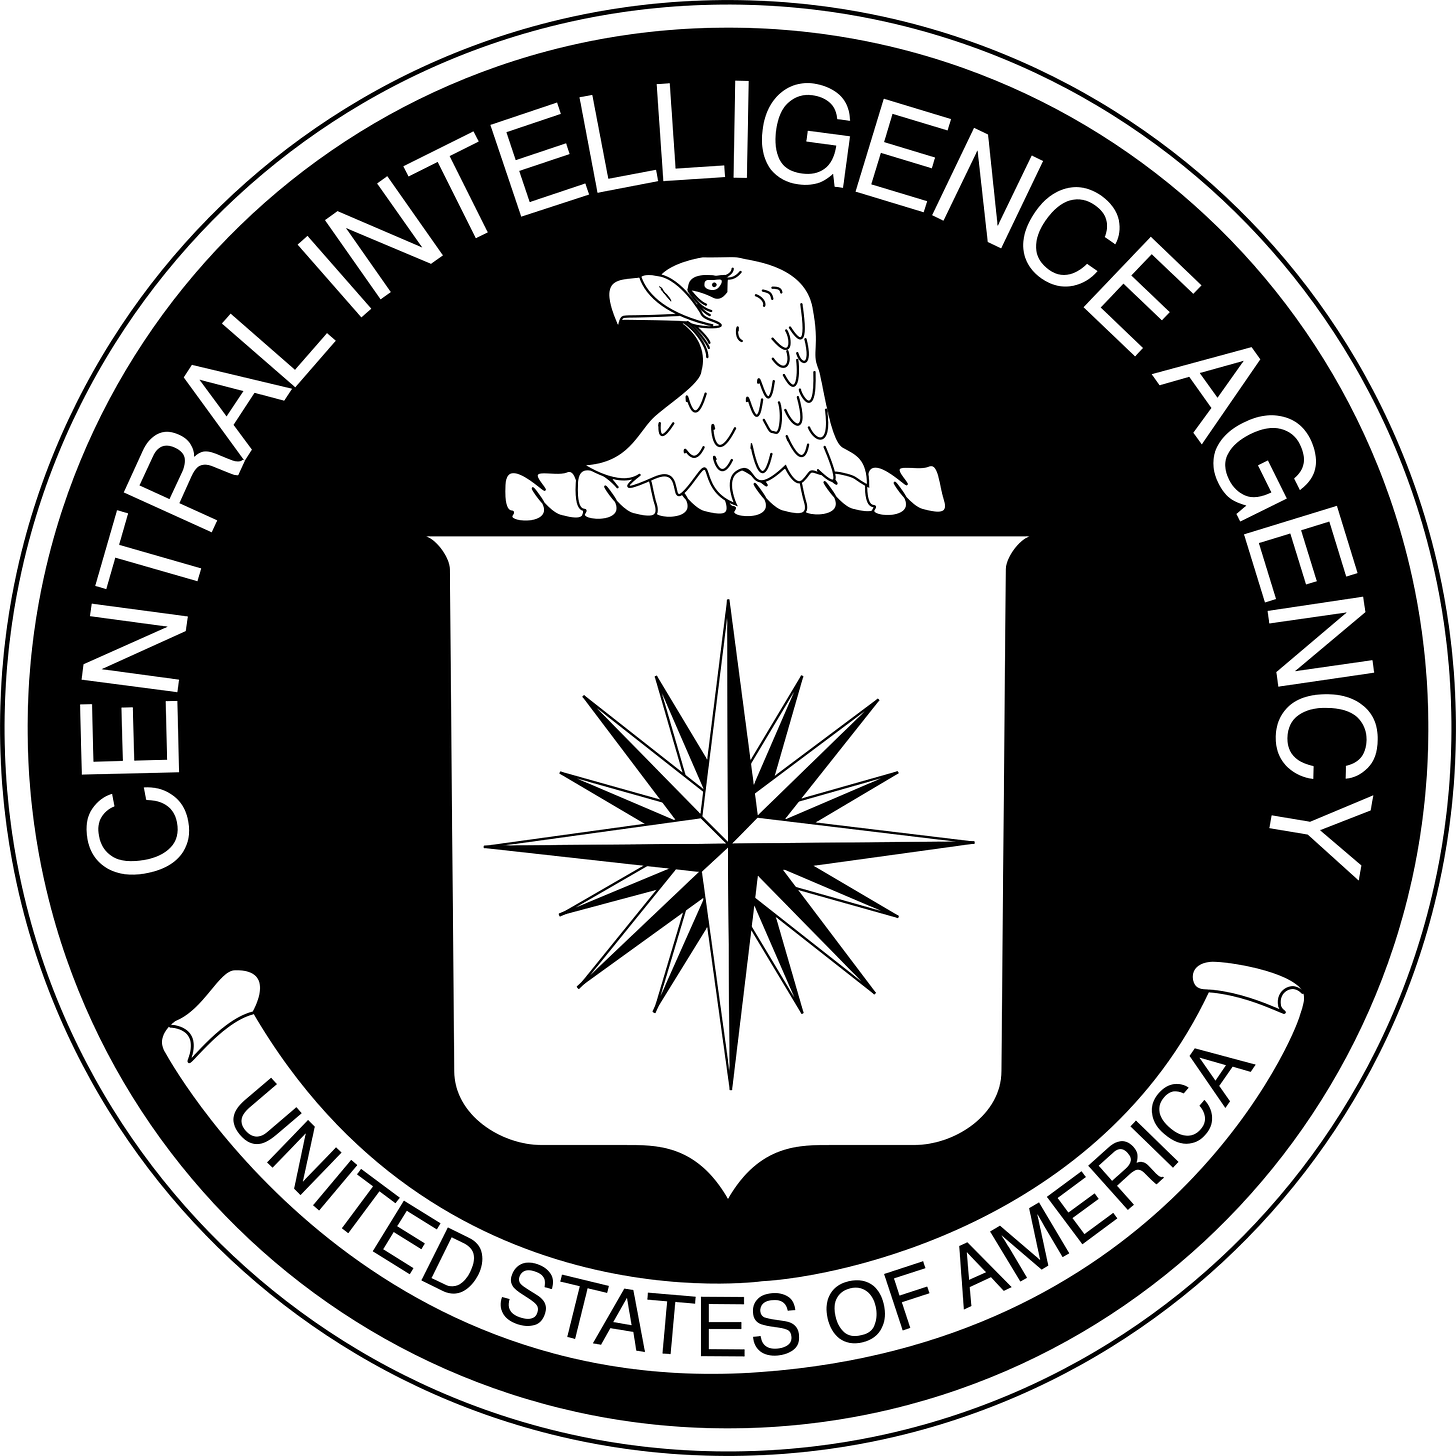 Soubor:Seal of the Central Intelligence Agency (B&W).svg - Wikipedia